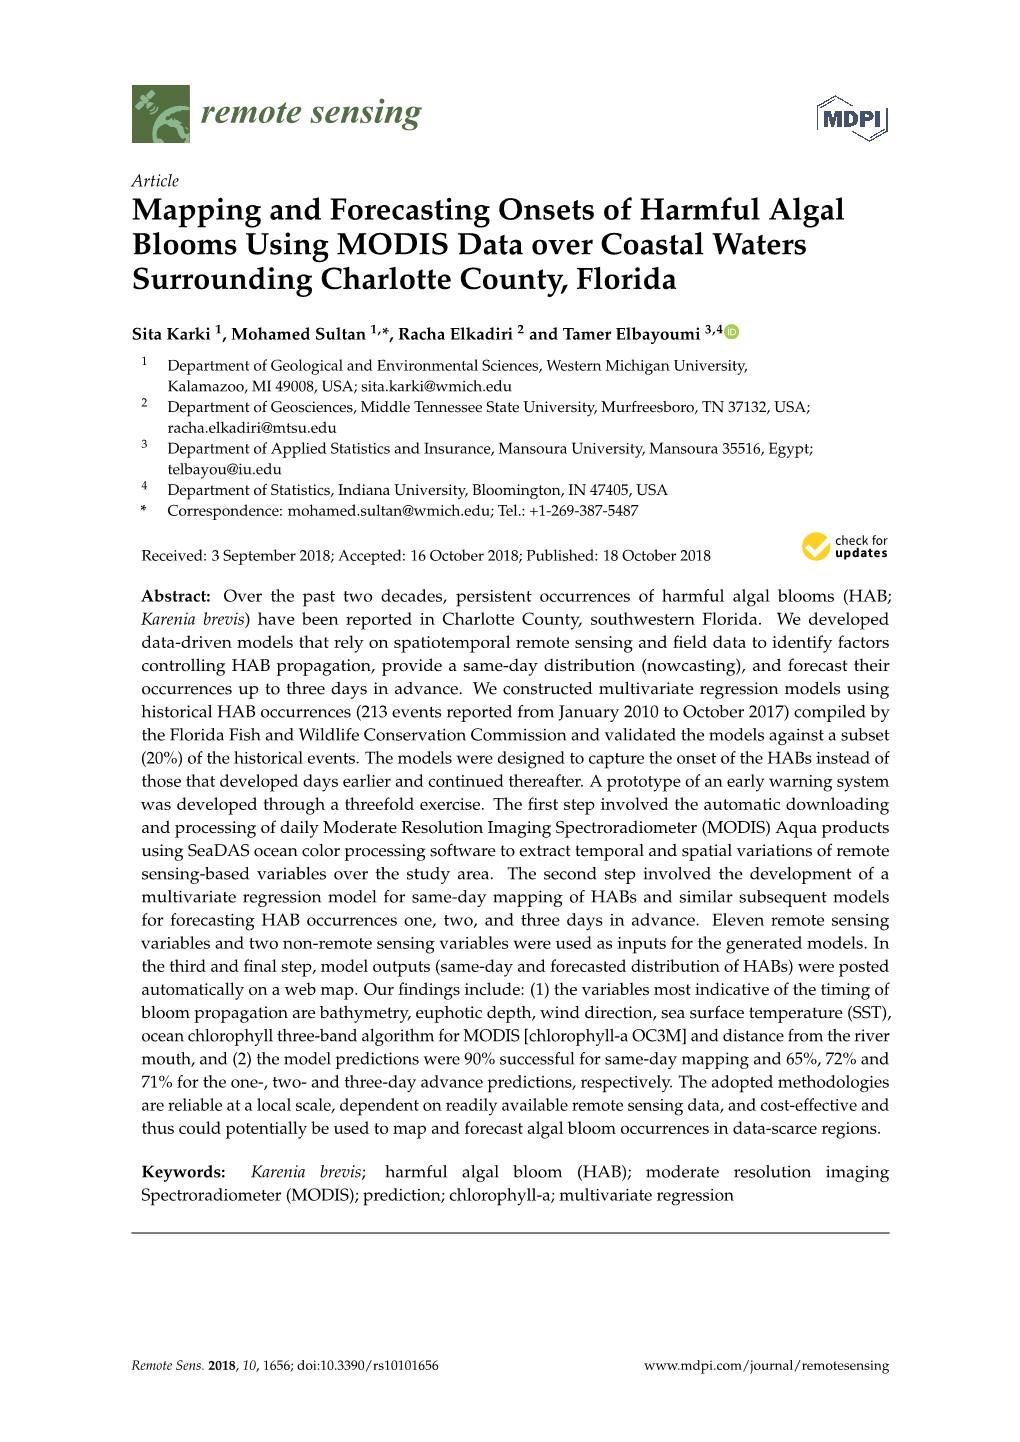 Mapping and Forecasting Onsets of Harmful Algal Blooms Using MODIS Data Over Coastal Waters Surrounding Charlotte County, Florida